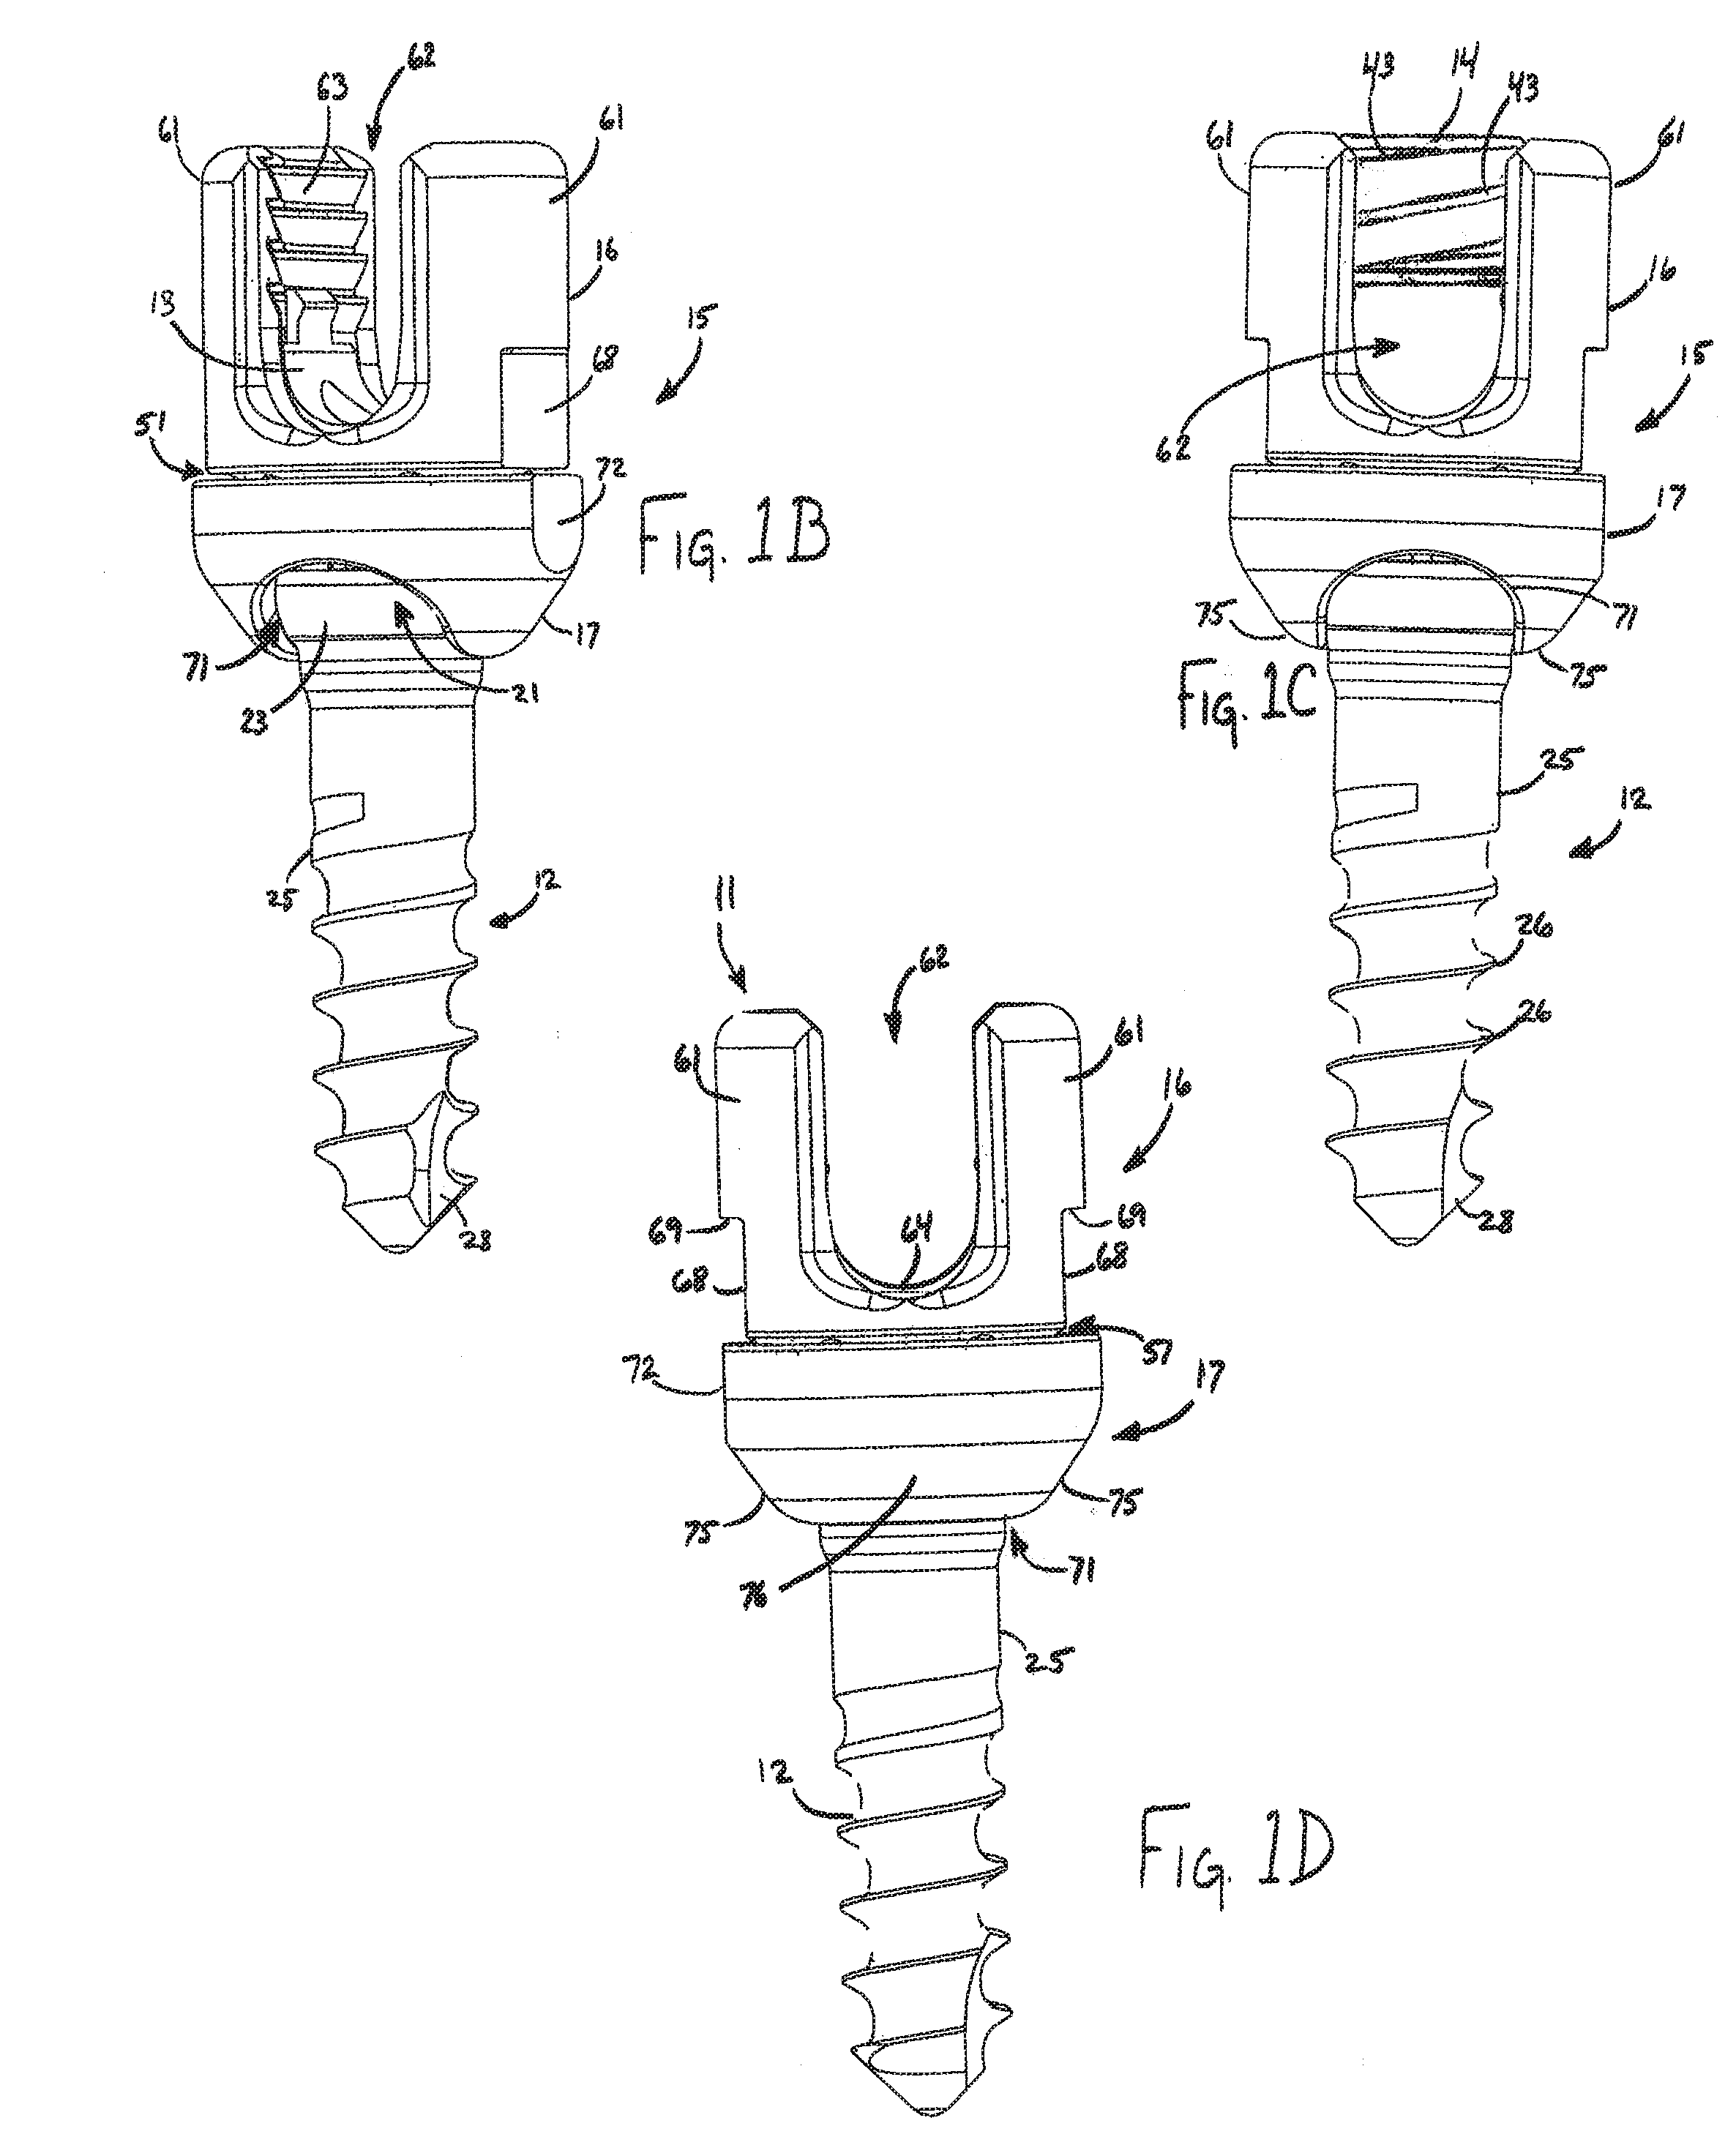 Wide Angulation Coupling Members For Bone Fixation System